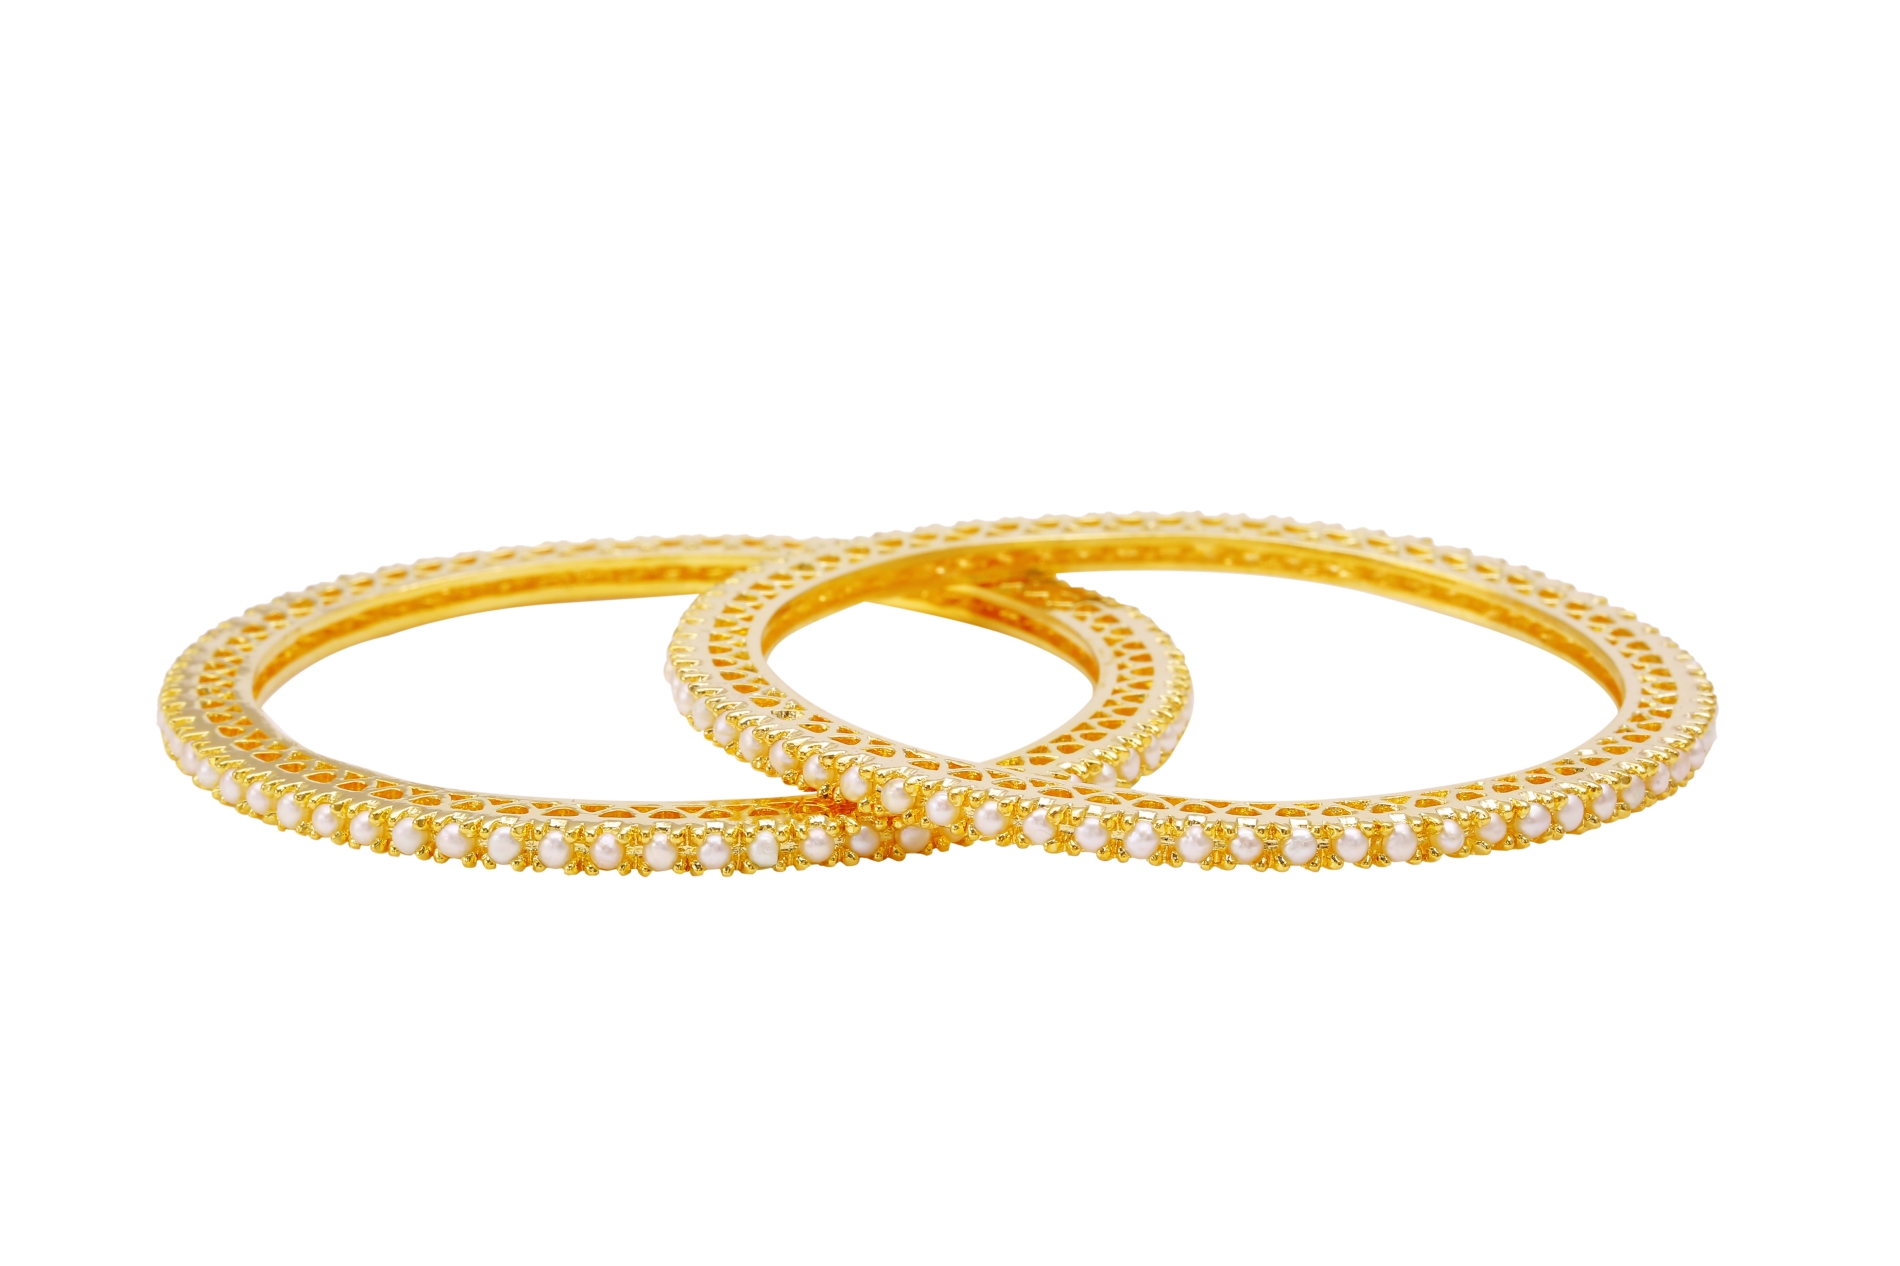 Pearl Bangles - Buy Fresh Water white pearls fixed together around ...